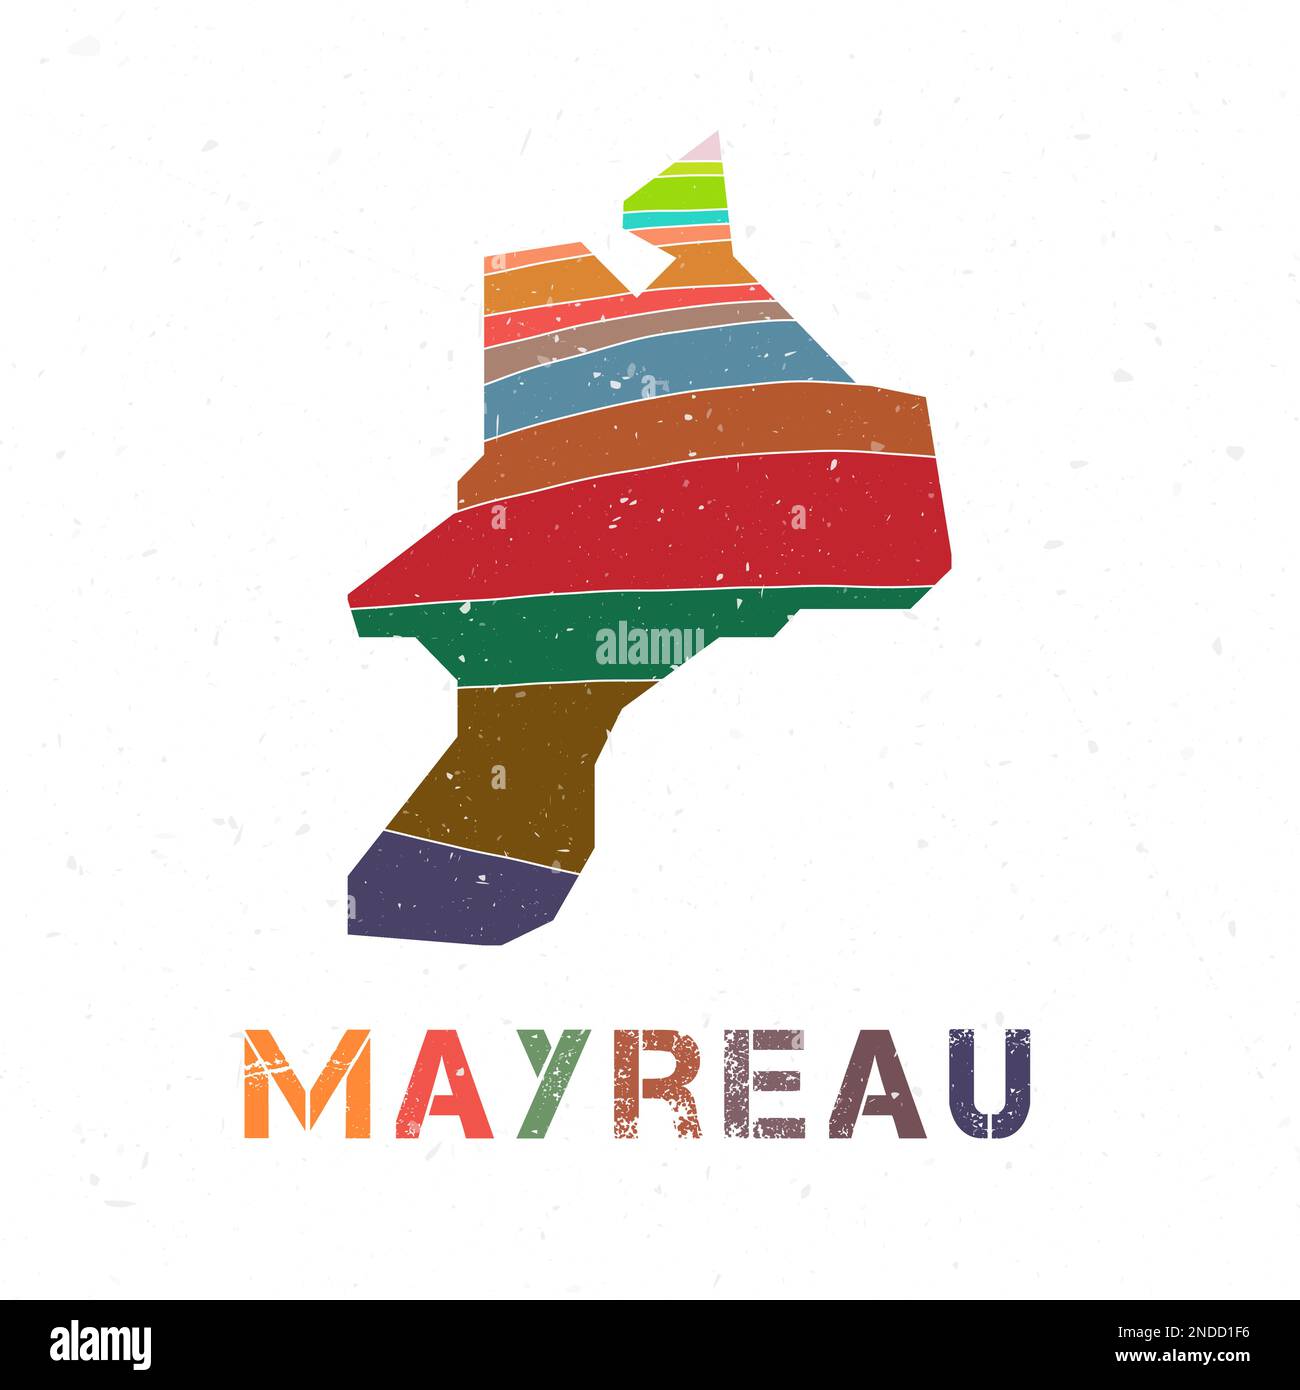 Mayreau map design. Shape of the island with beautiful geometric waves and grunge texture. Radiant vector illustration. Stock Vector